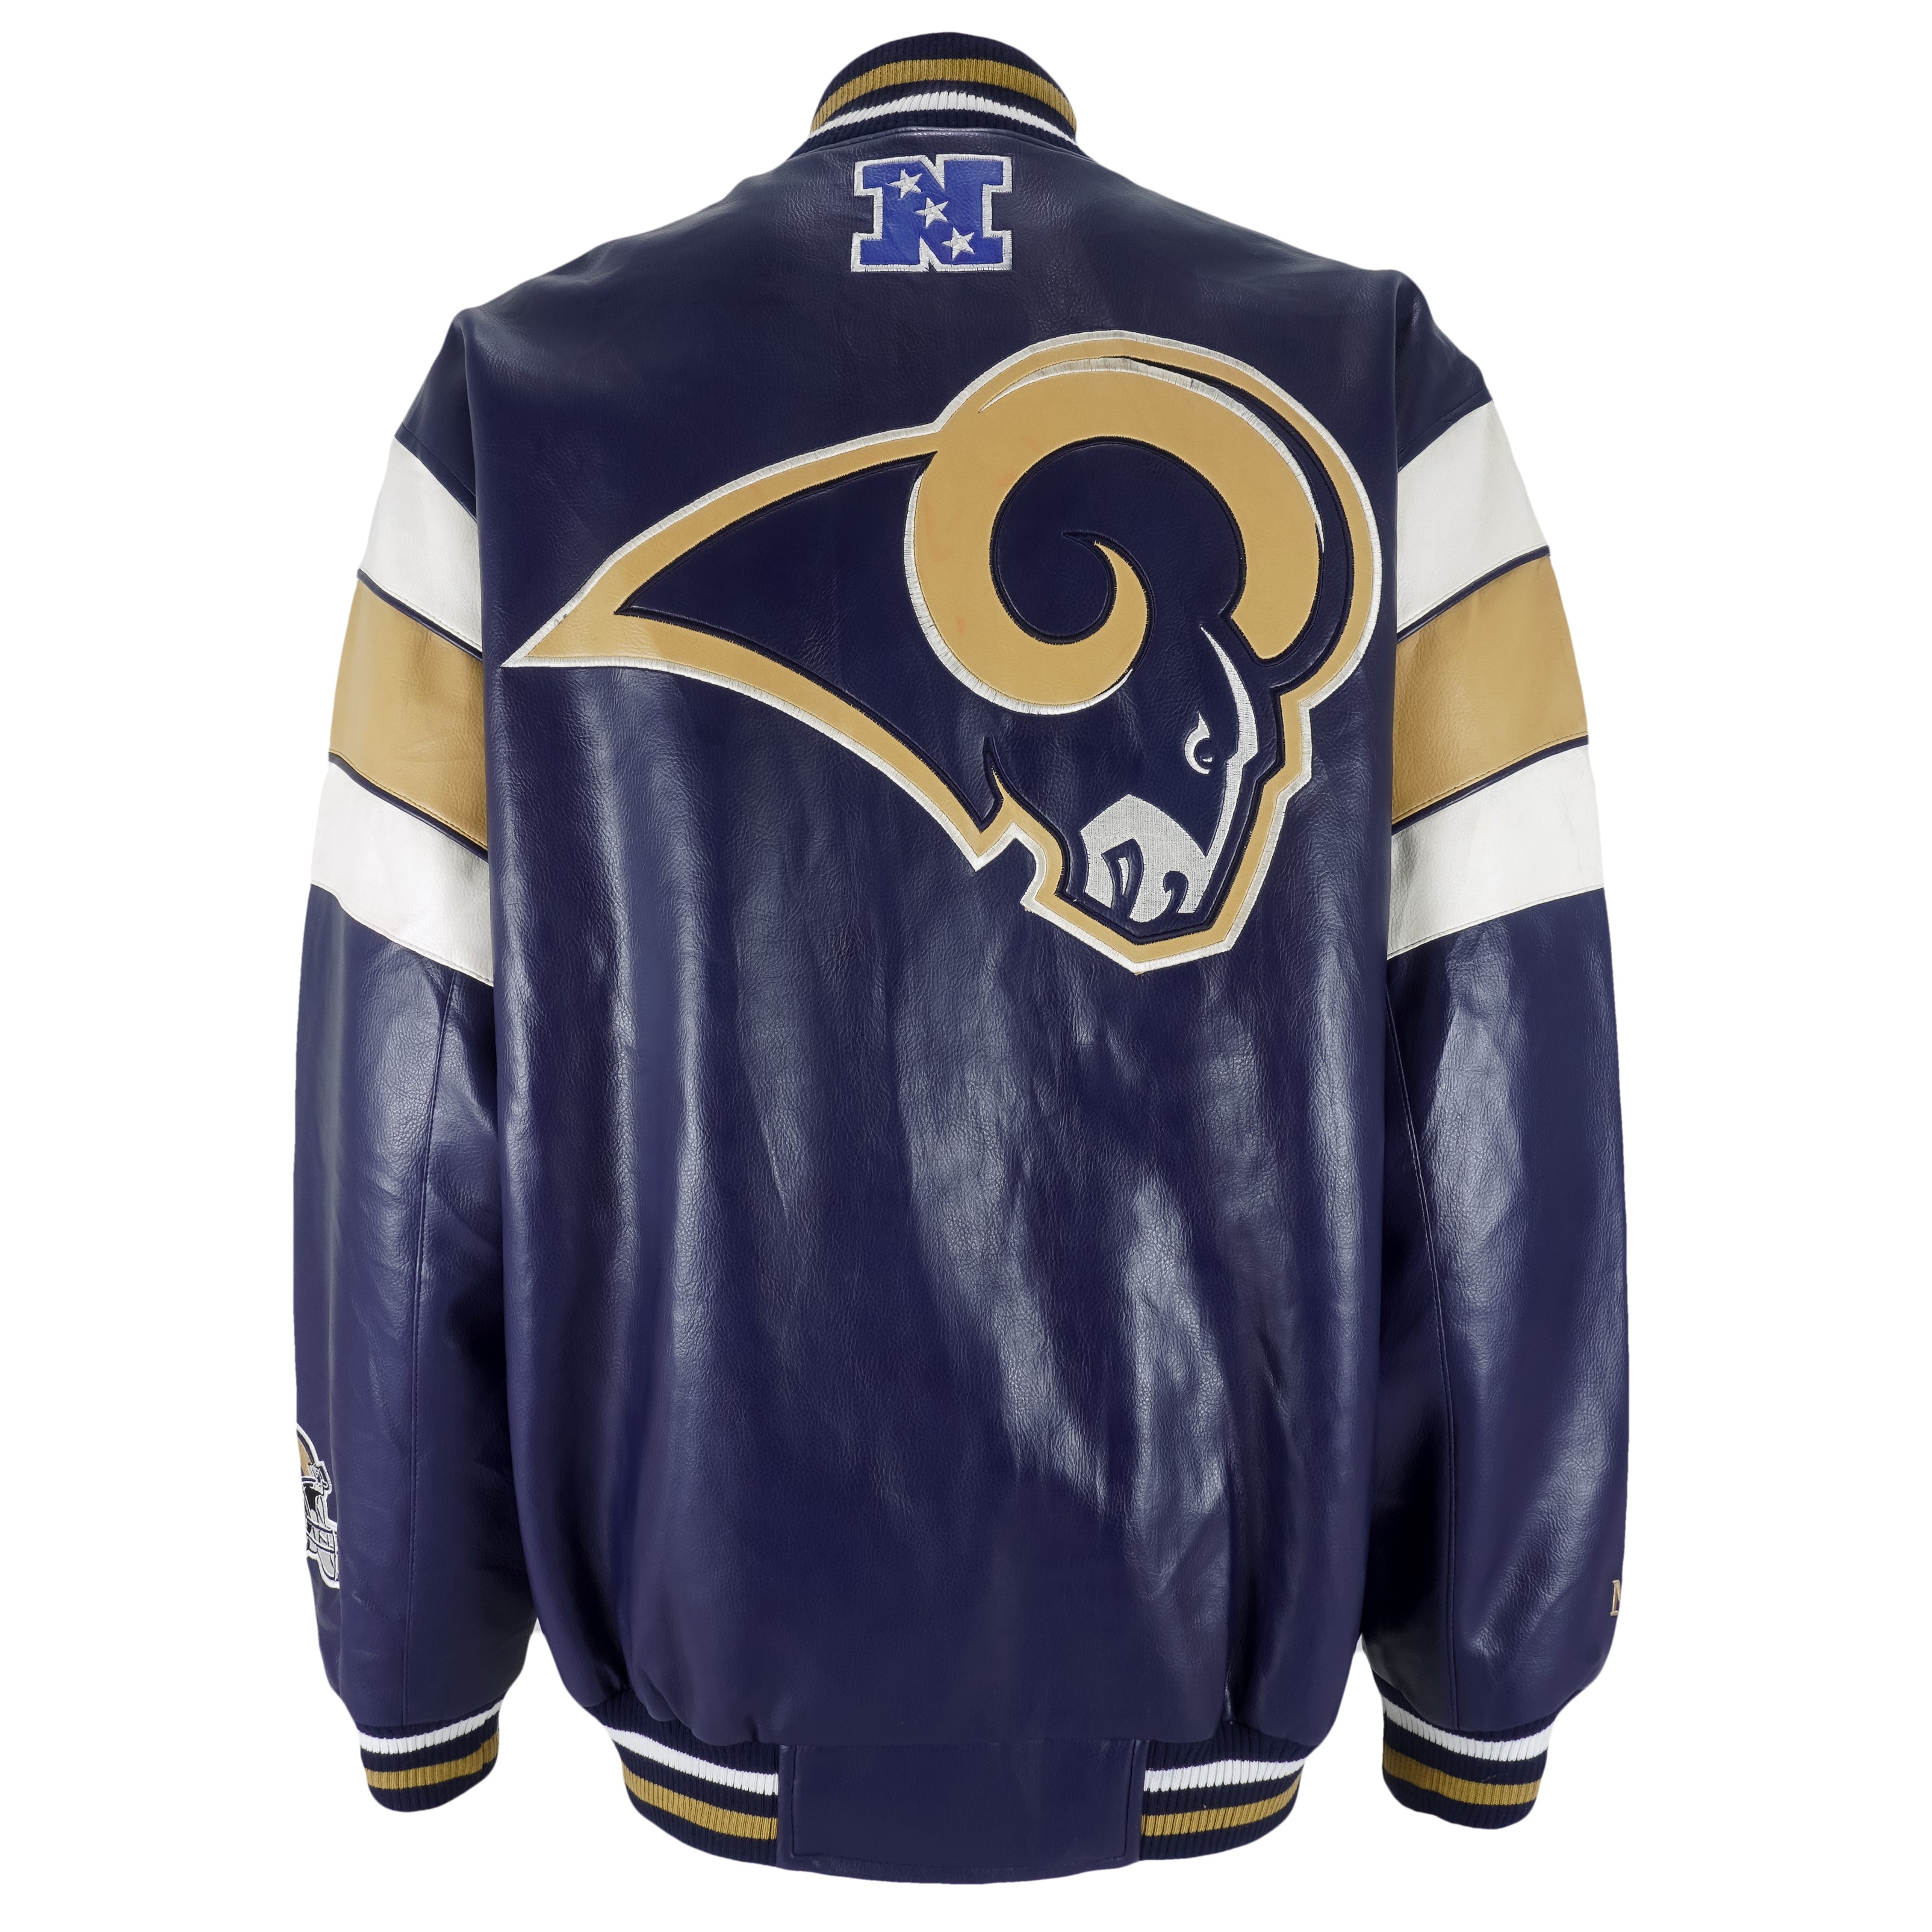 NFL RAMS Jacket Vintage Made in China 